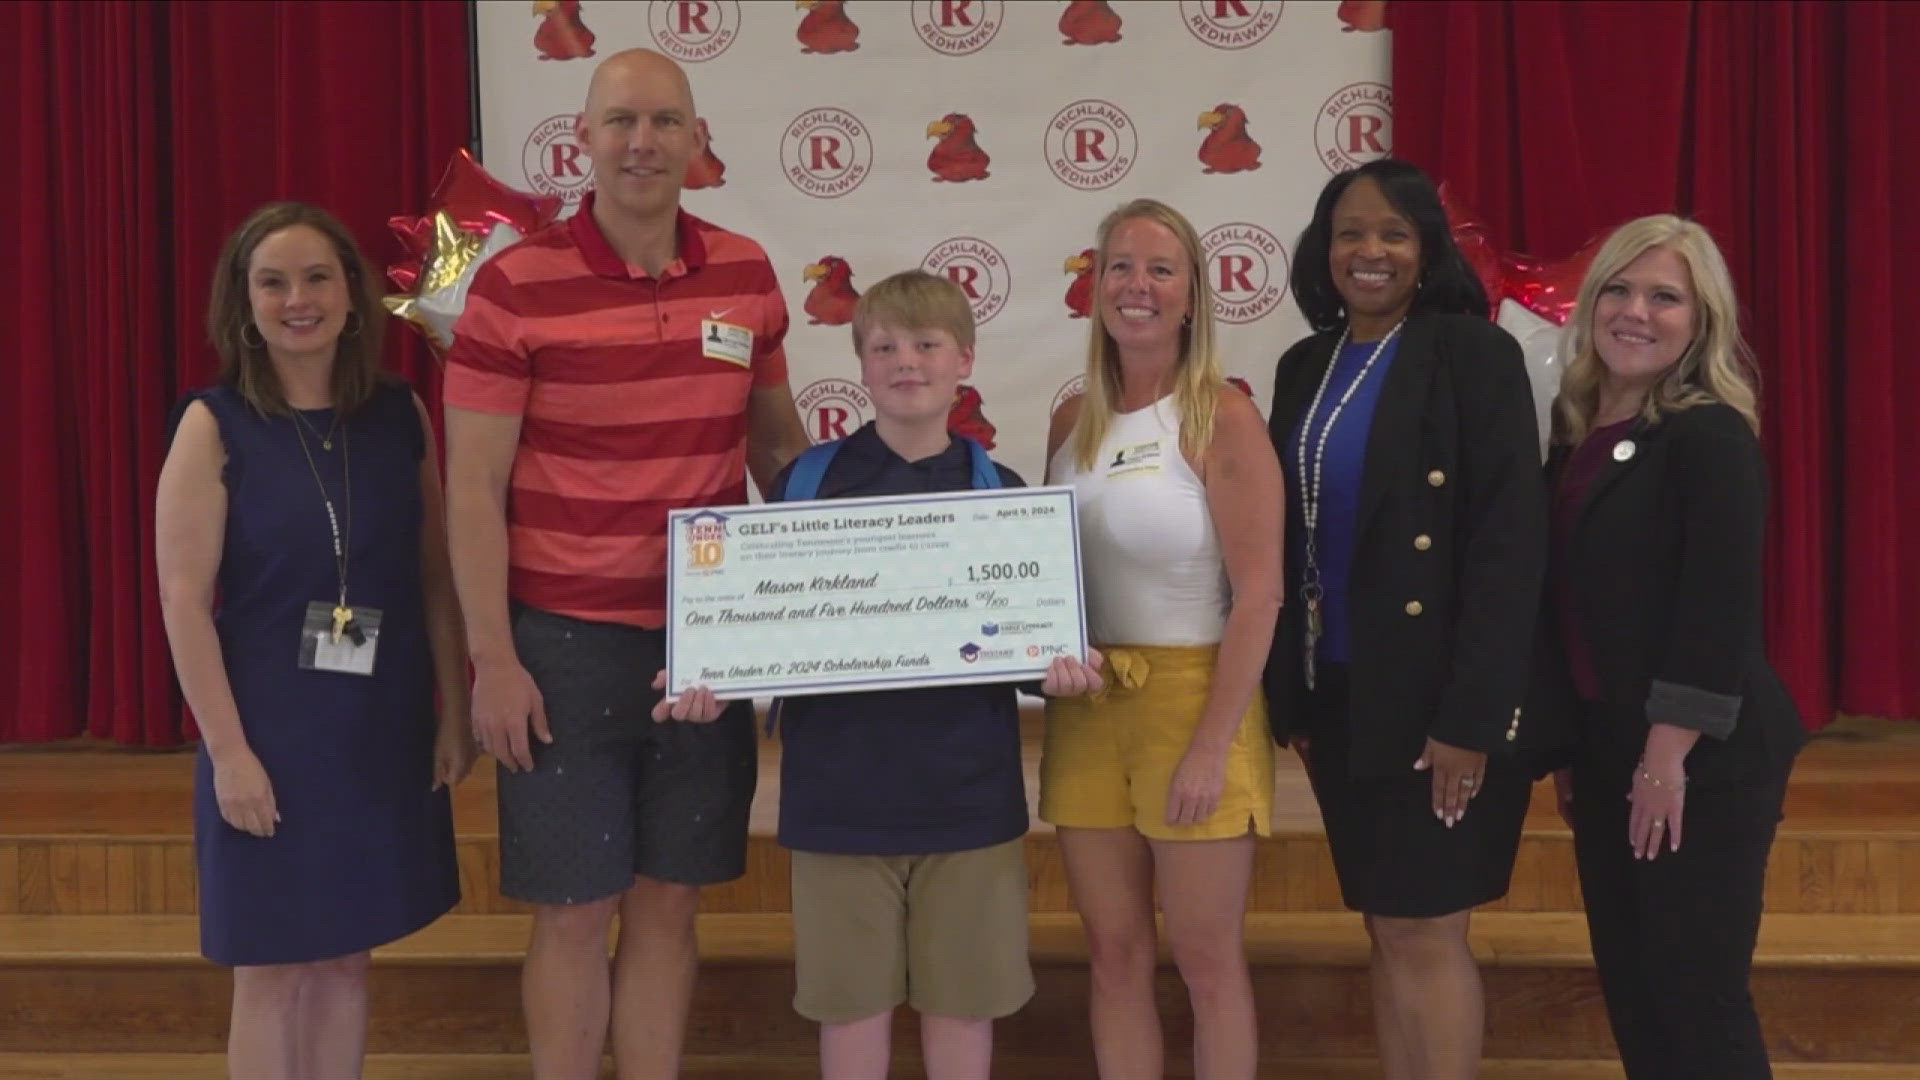 Mason Kirkland is one of the 10 under 10 Literacy Ambassadors, earning a $1,500 scholarship and a new backpack filled with books.